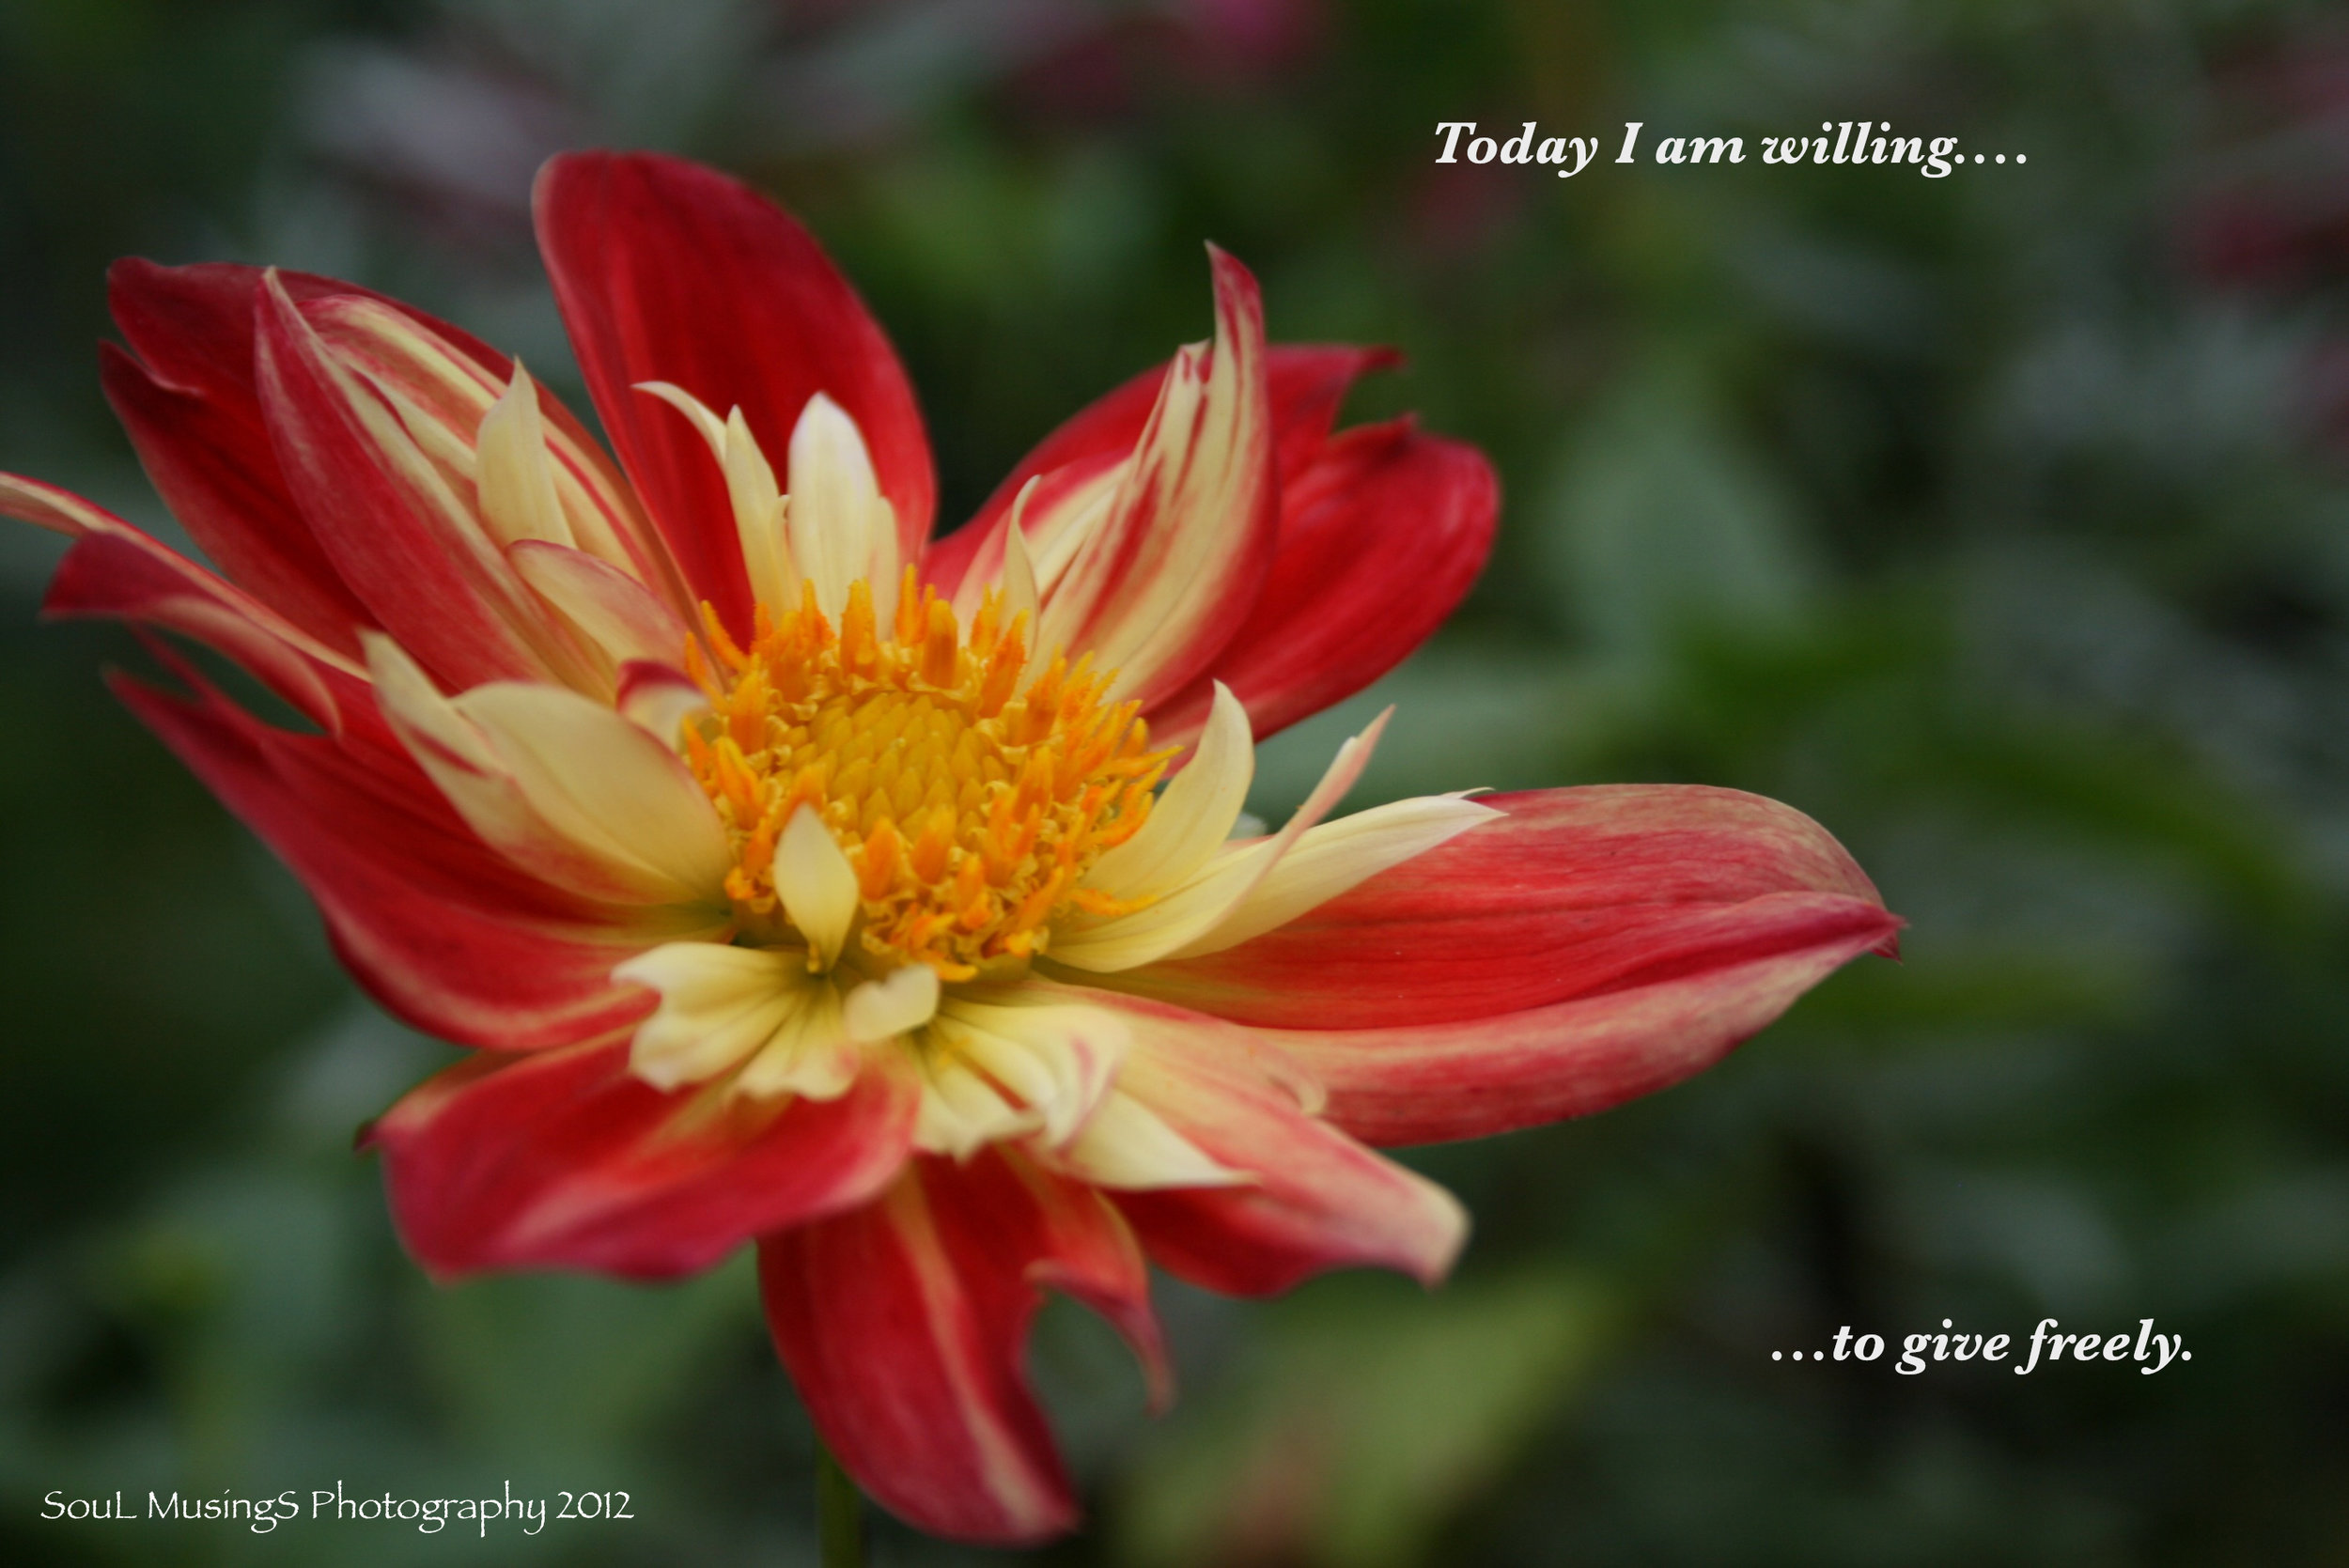 Dahlia_Willing_give freely_labled.jpg